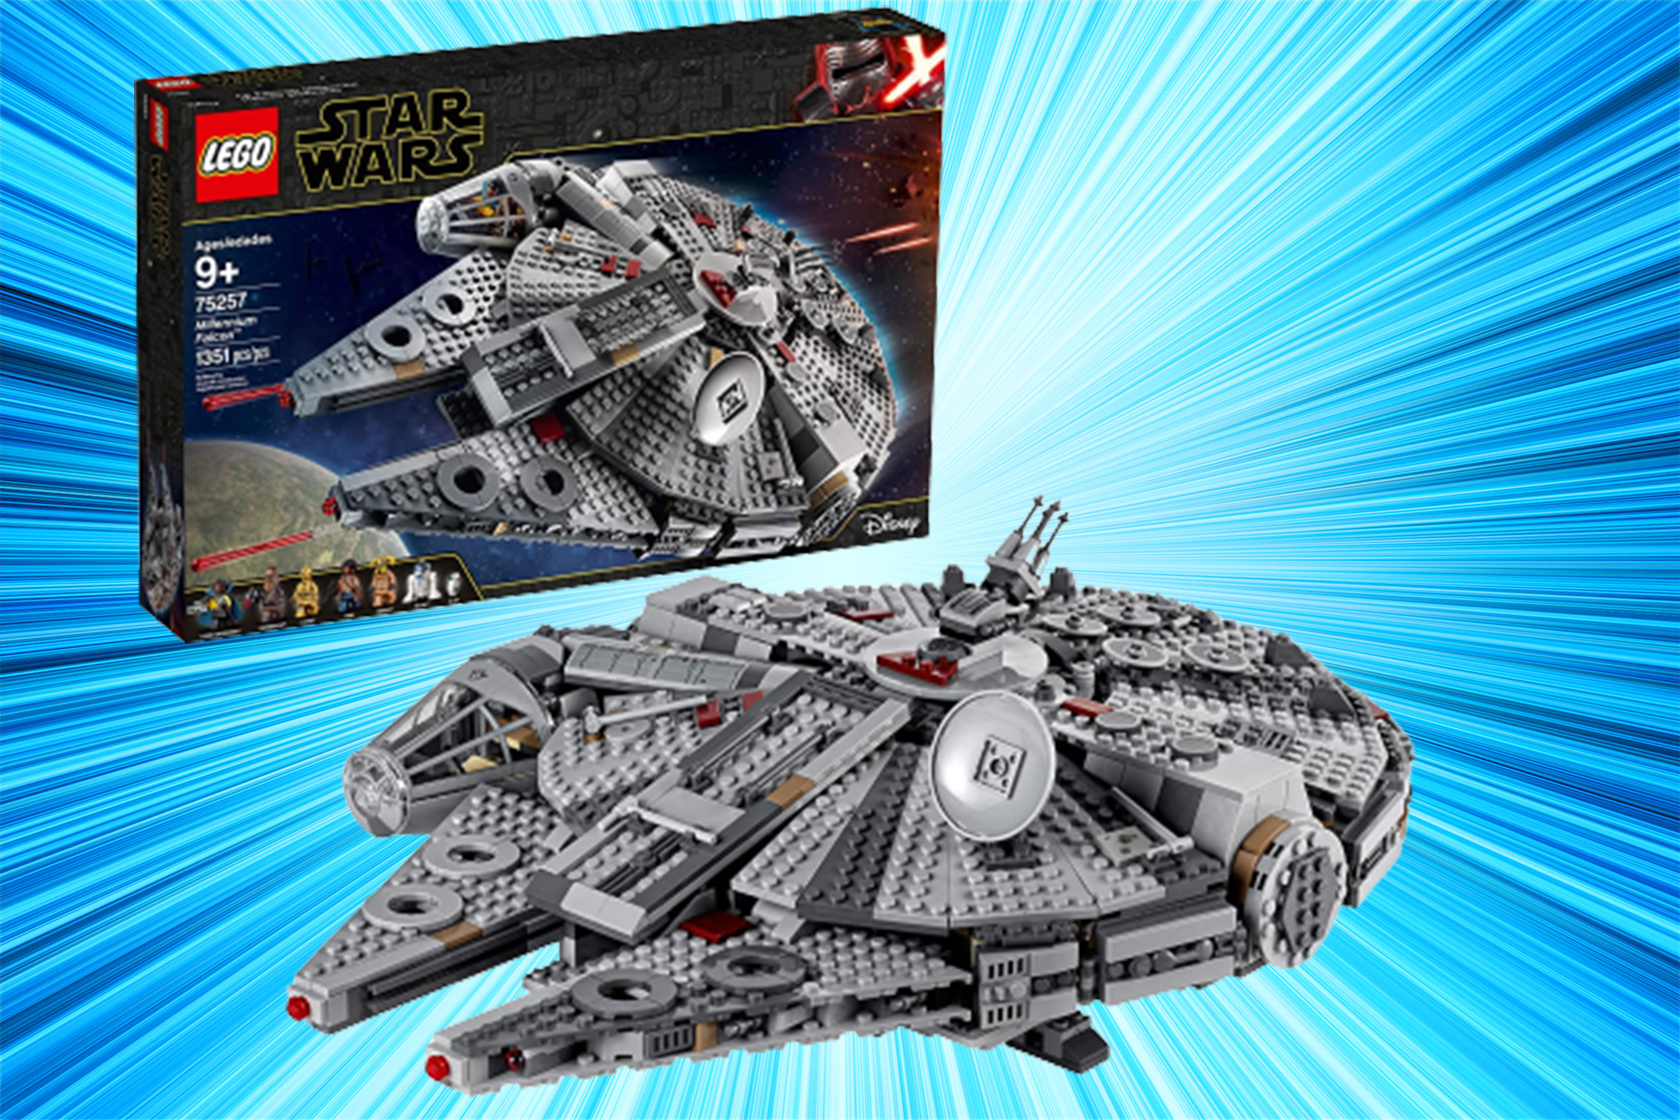 Get the LEGO 'Star Wars' Millennium Falcon set for 20% off on Amazon